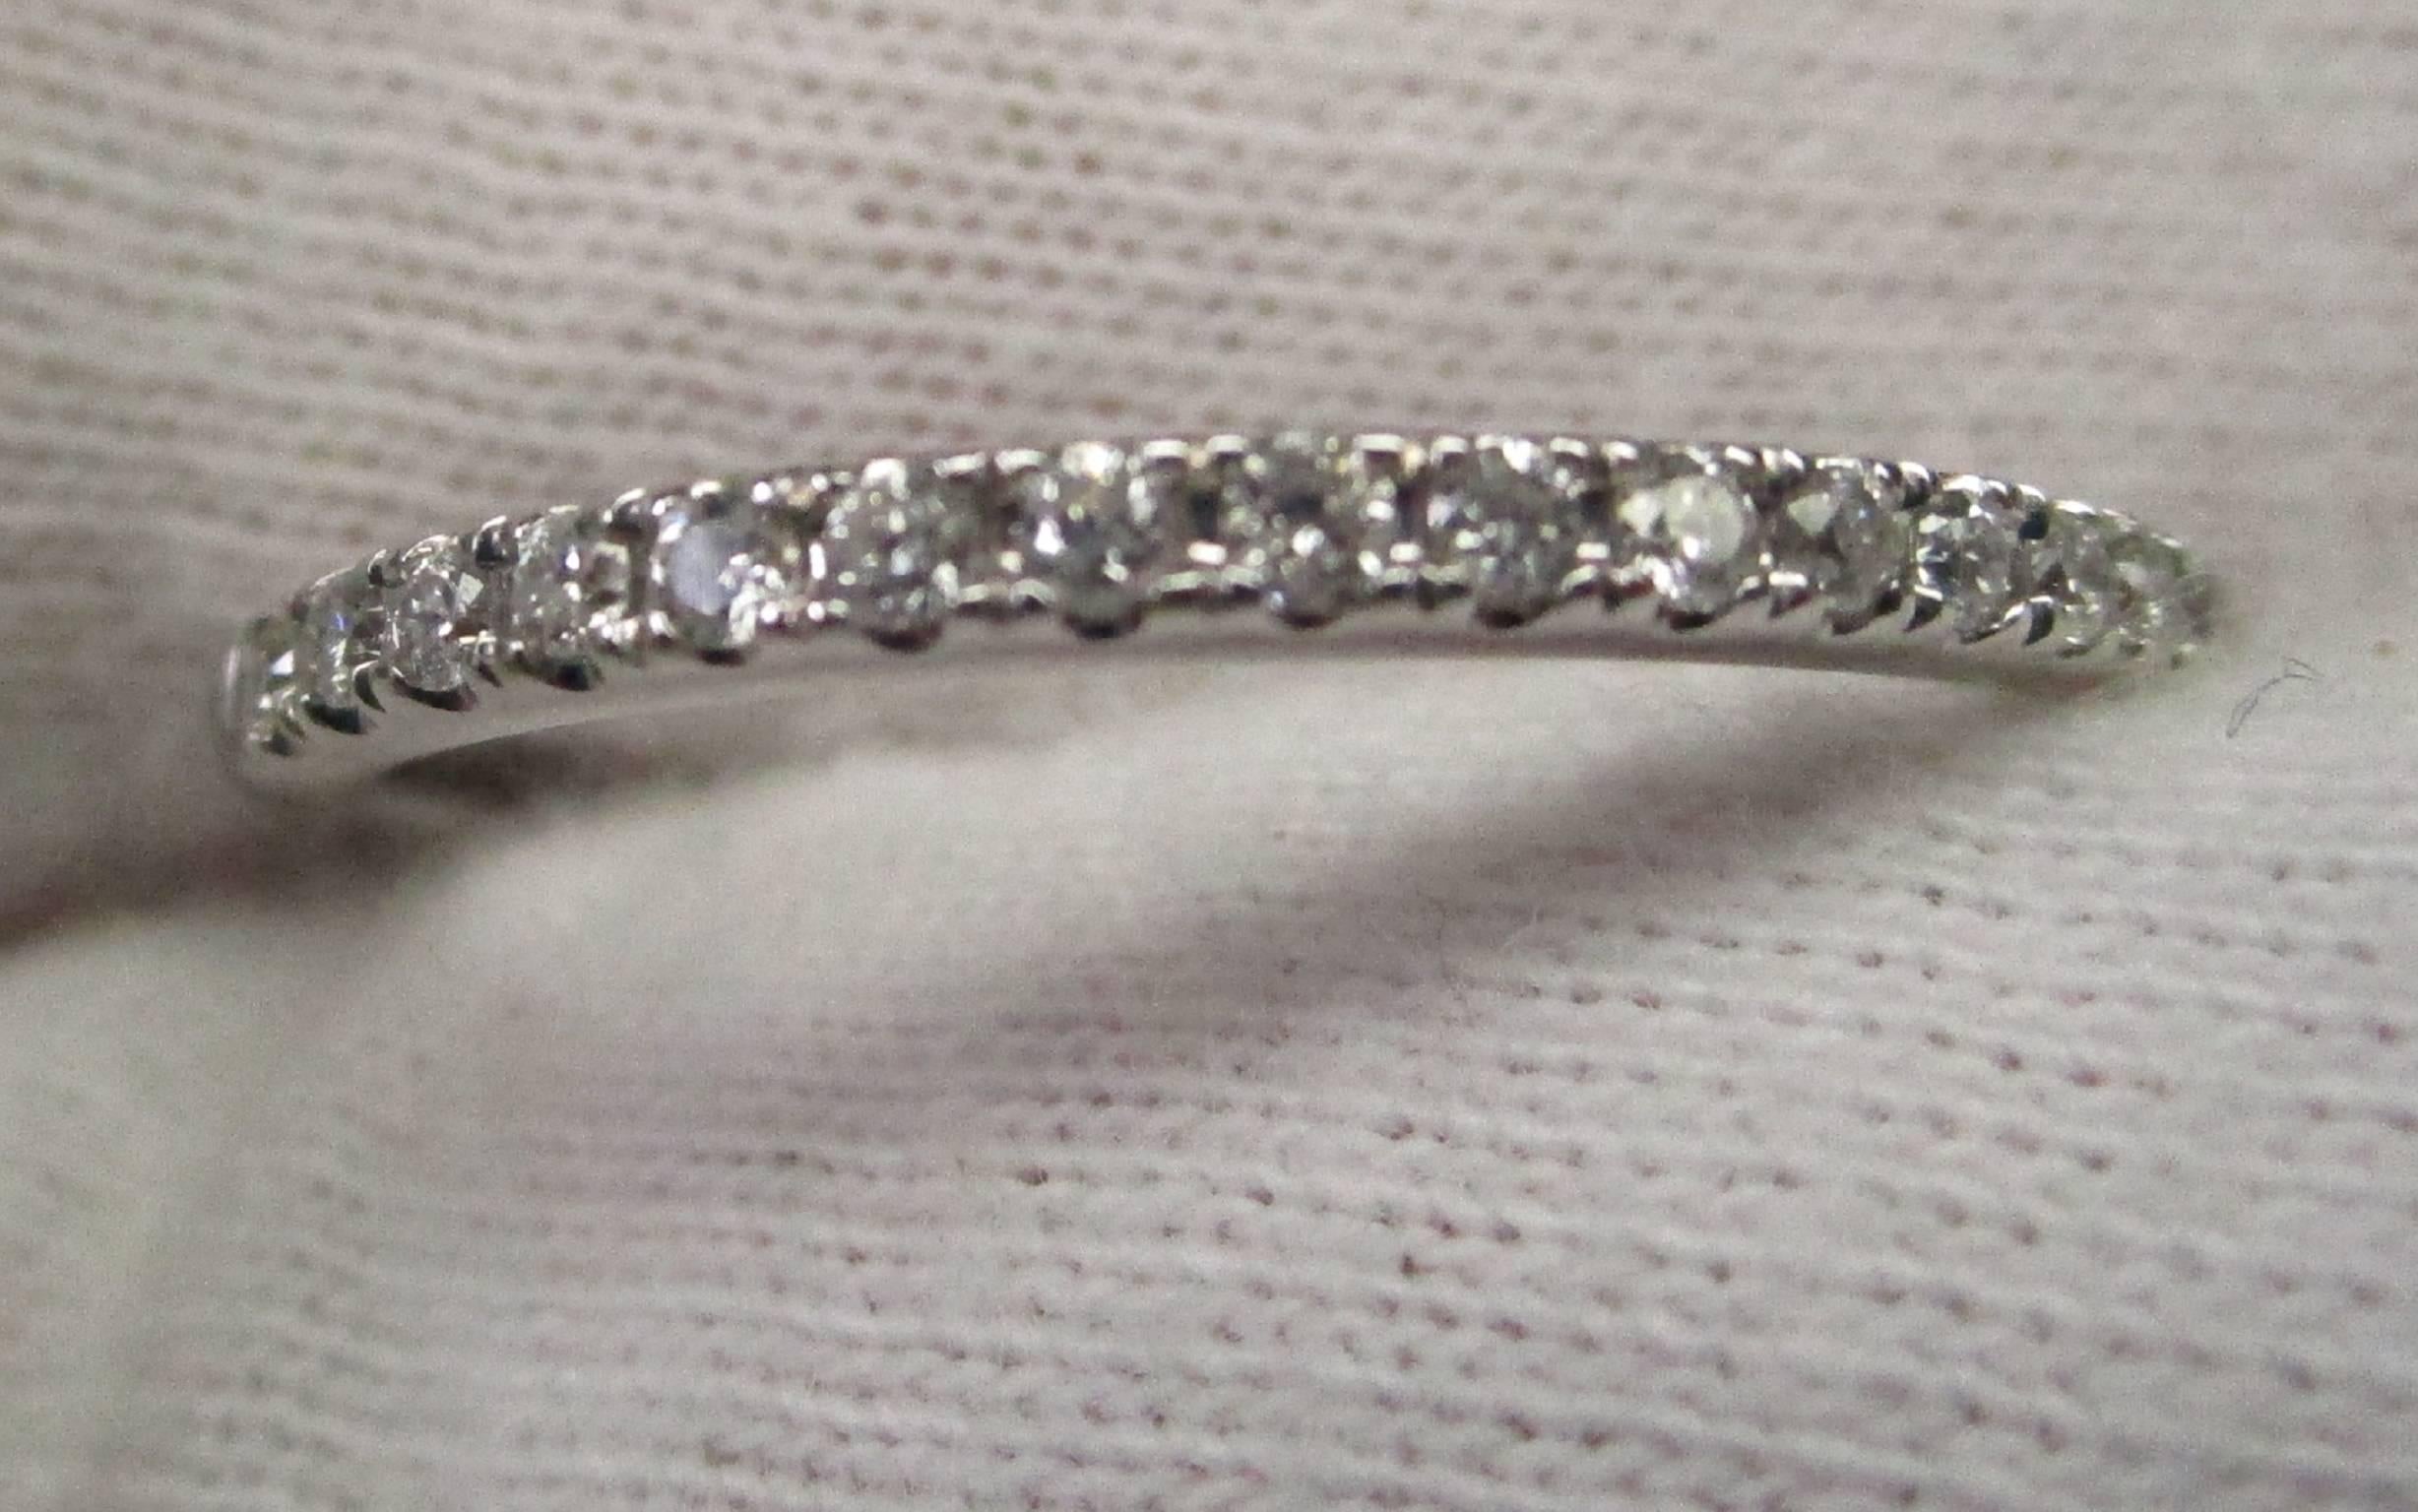 This is a lovely 14 K white gold band with 0.10 carat total weight of round diamonds. This would be a beautiful wedding band or a precious anniversary ring. You can't go wrong with diamonds that are H in color and VS2 in clarity. You would be hard